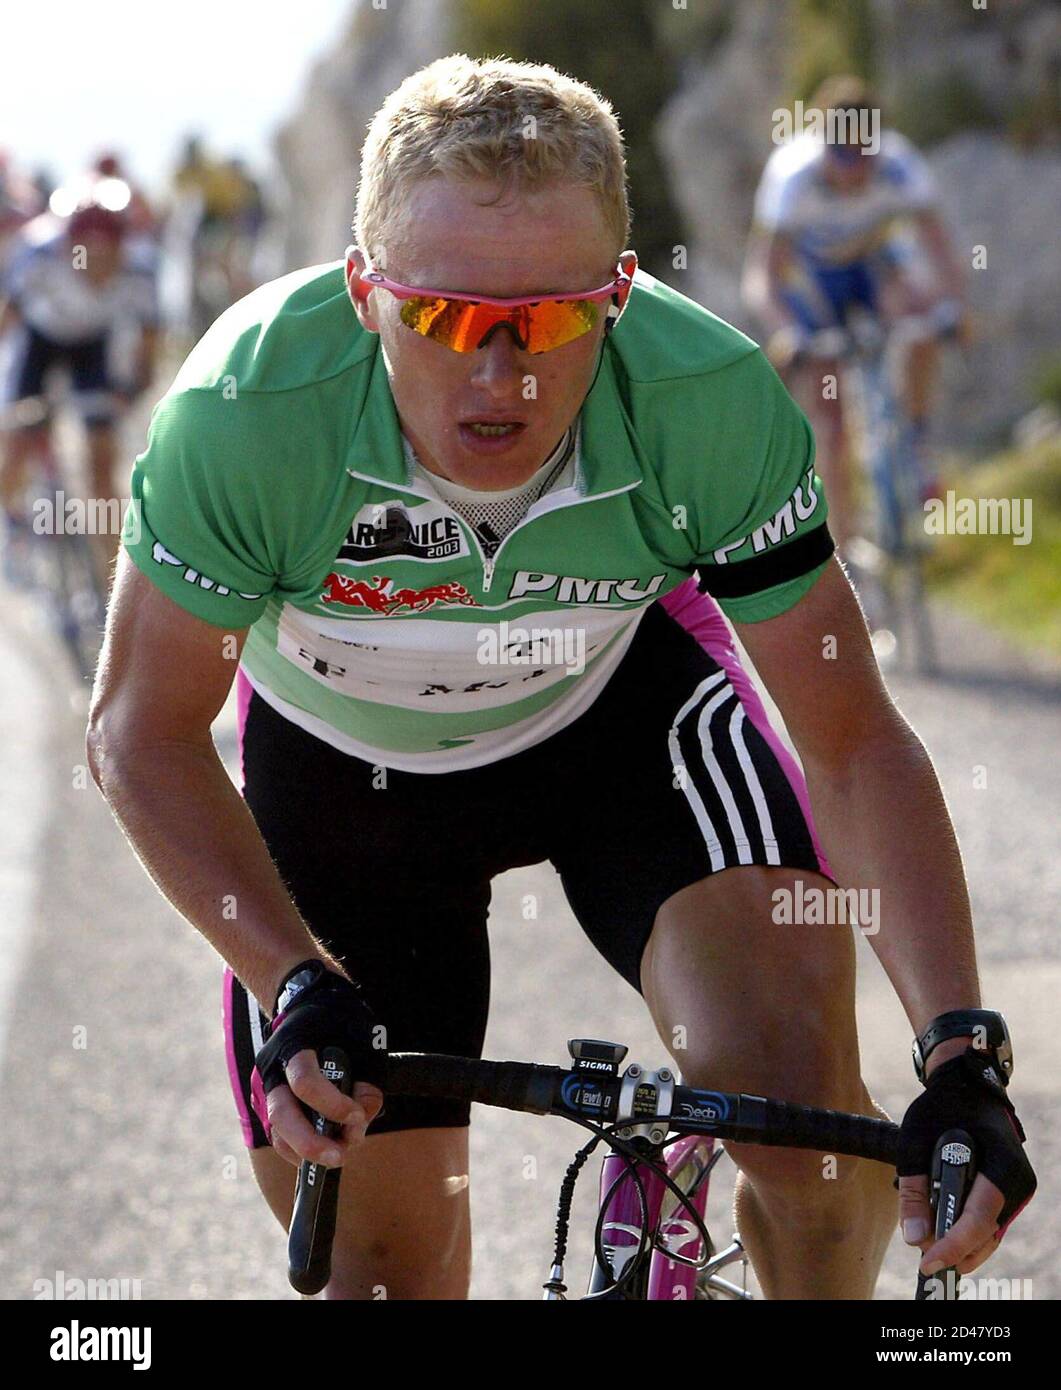 Kazakhstan's Alexander Vinokourov breaks away on the Mont-Faron climb to  win the fifth stage of the Paris-Nice cycling race in Toulon, March 14,  2003. Vinokourov dedicated his victory to compatriot Andrei Kivilev